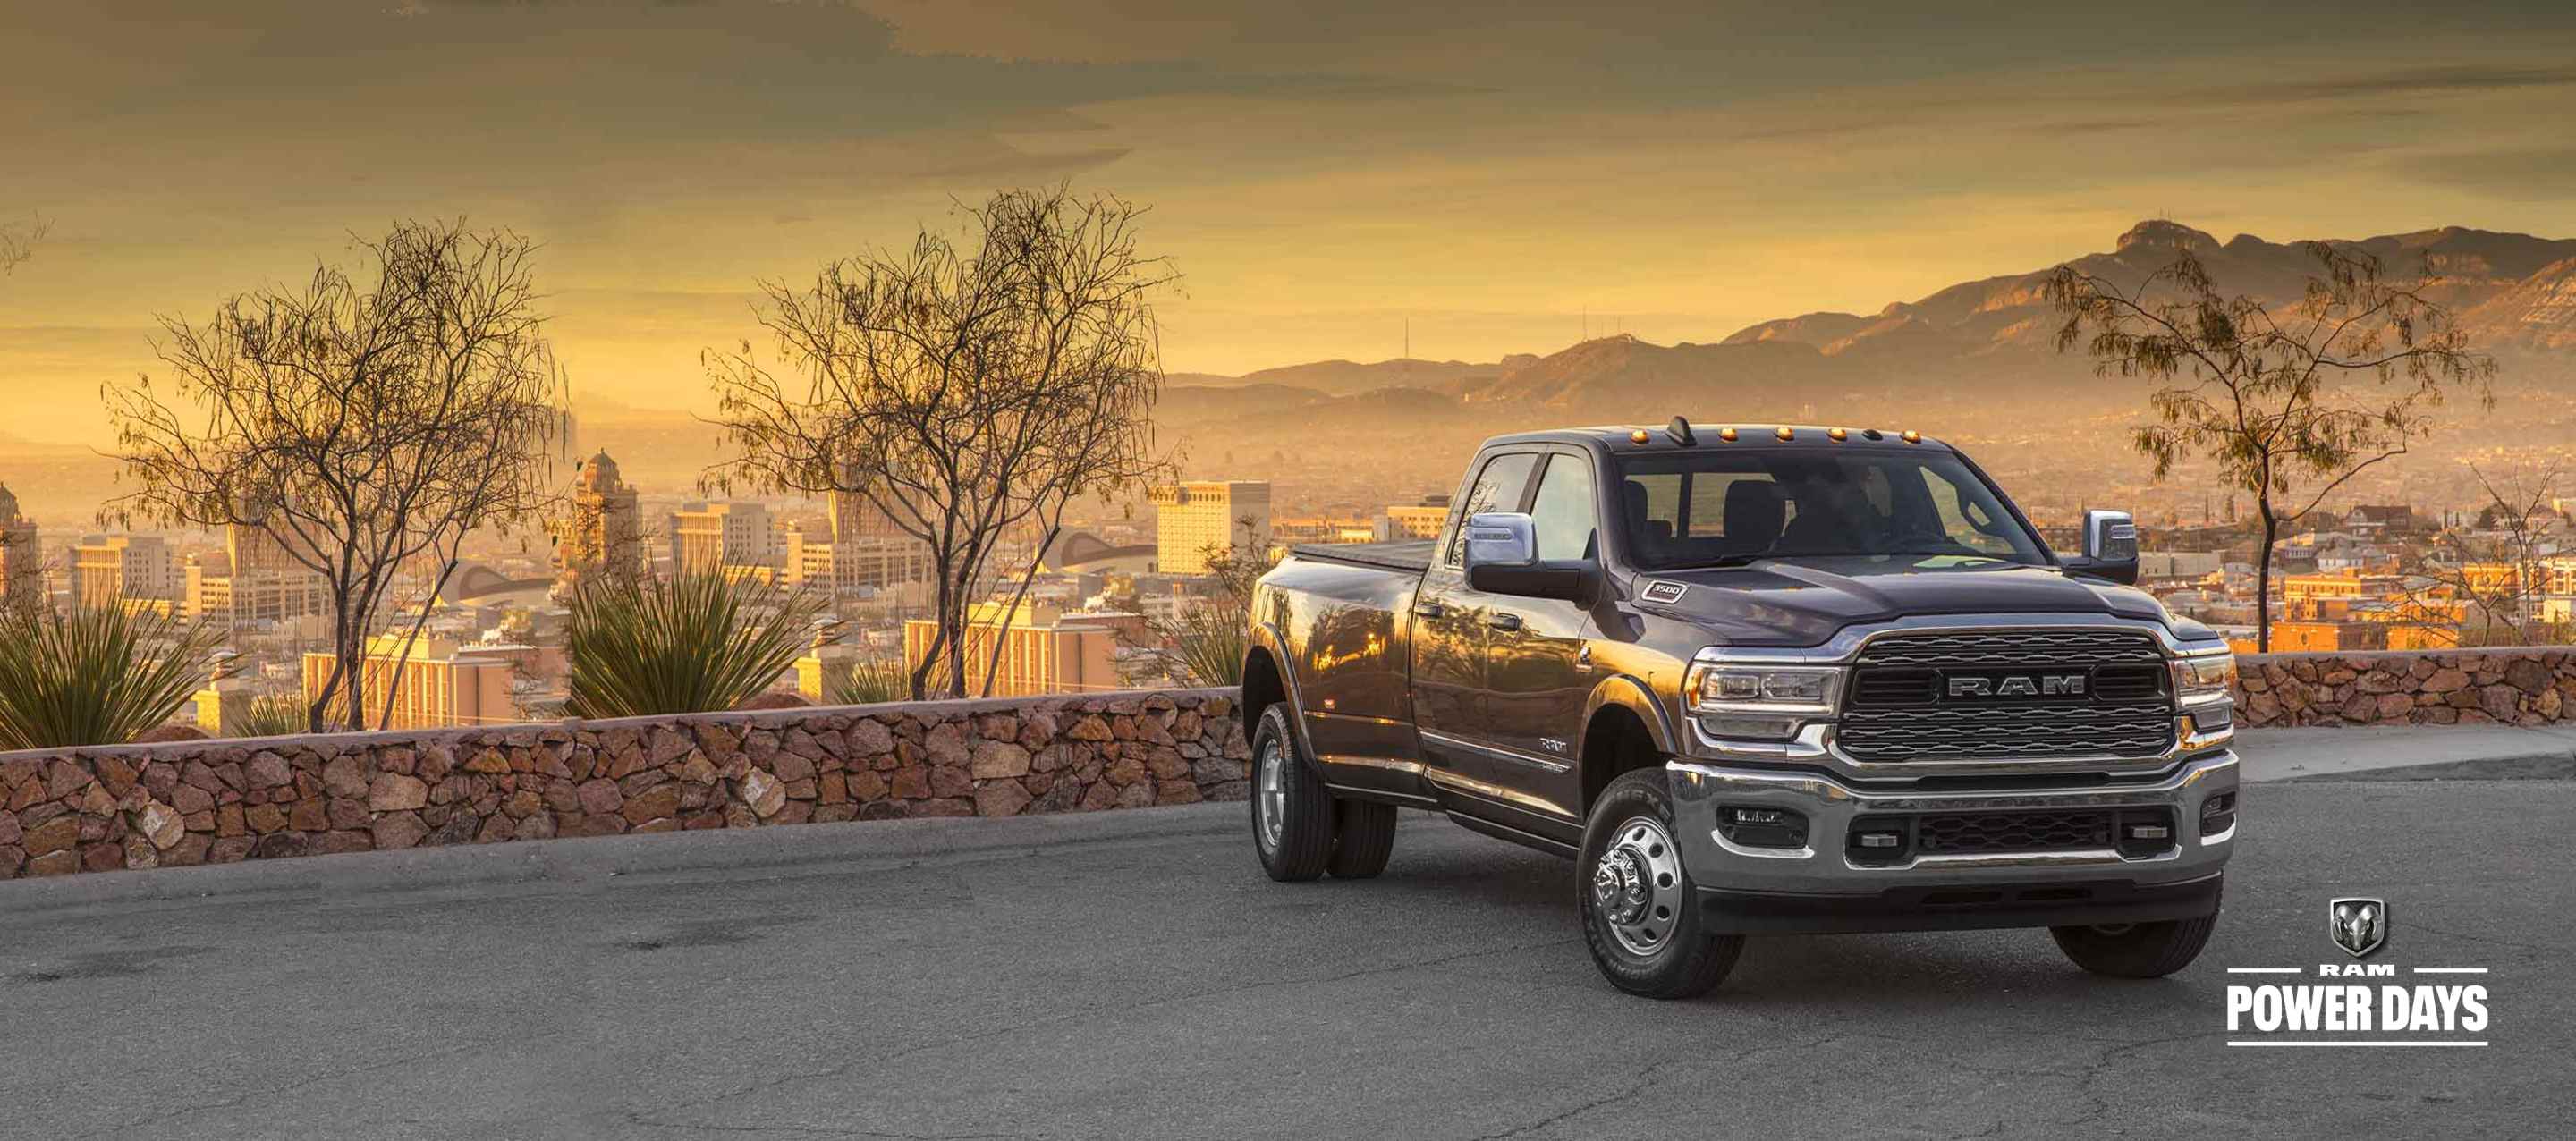 A 2023 Ram 3500 Limited 4x4 Crew Cab parked in a courtyard overlooking a cityscape below and mountains at sunset. Power Days Sales Event.